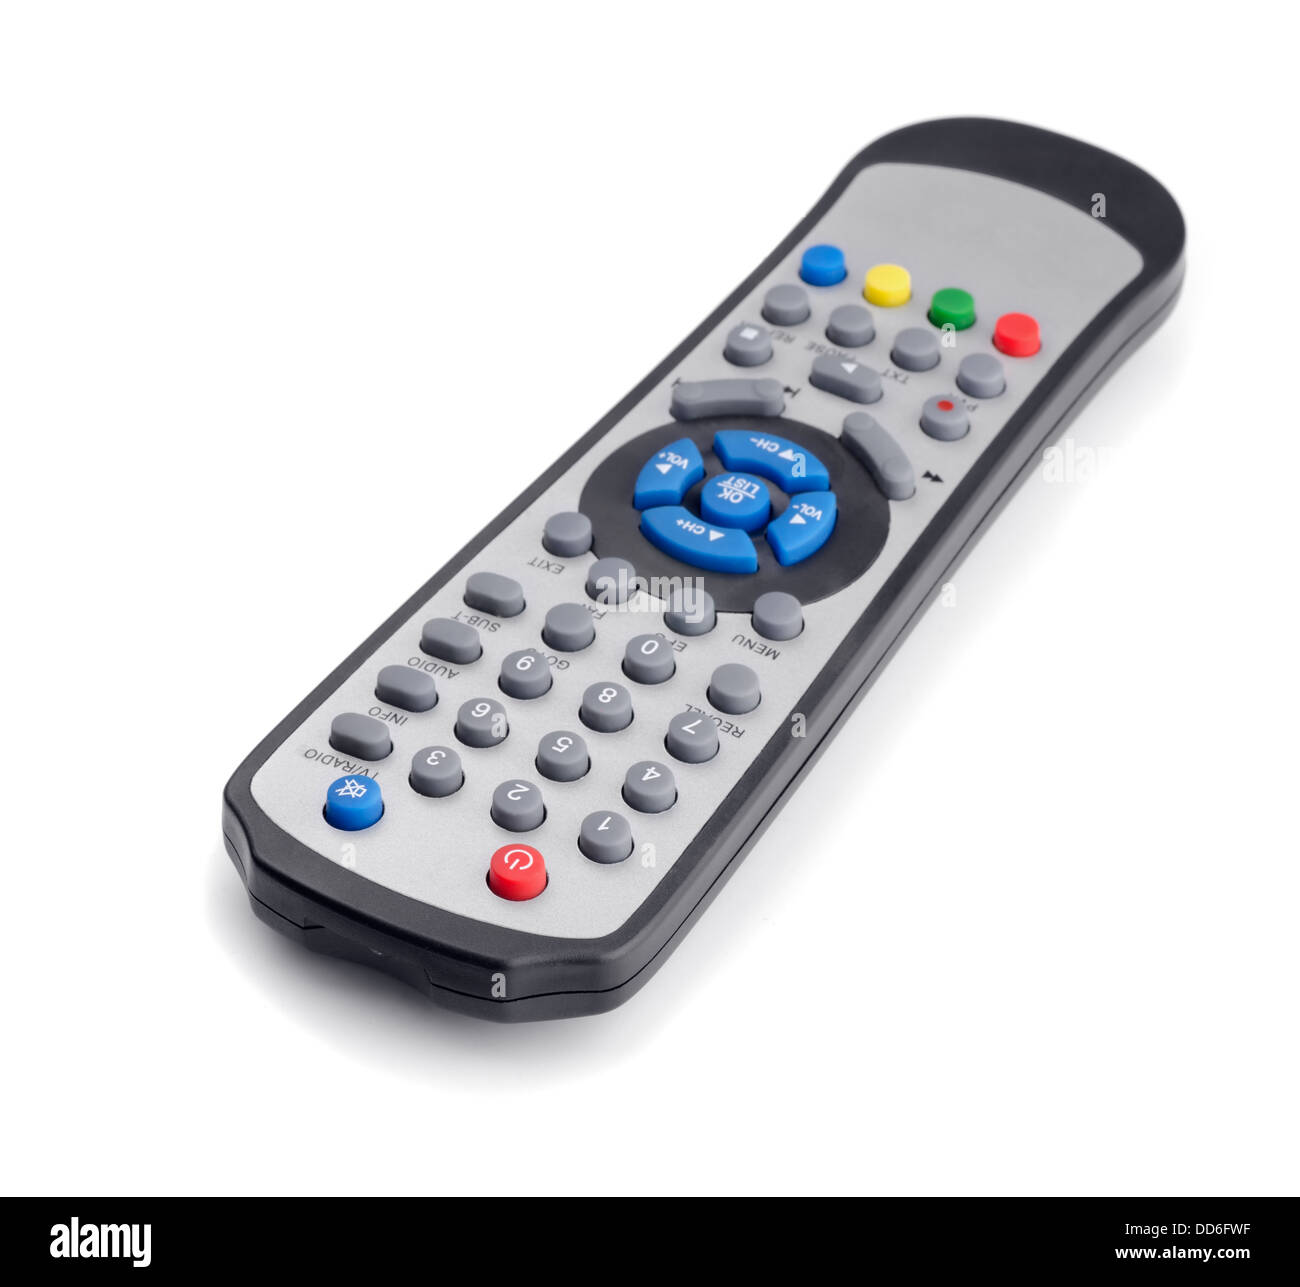 Universal remote control isolated on white Stock Photo